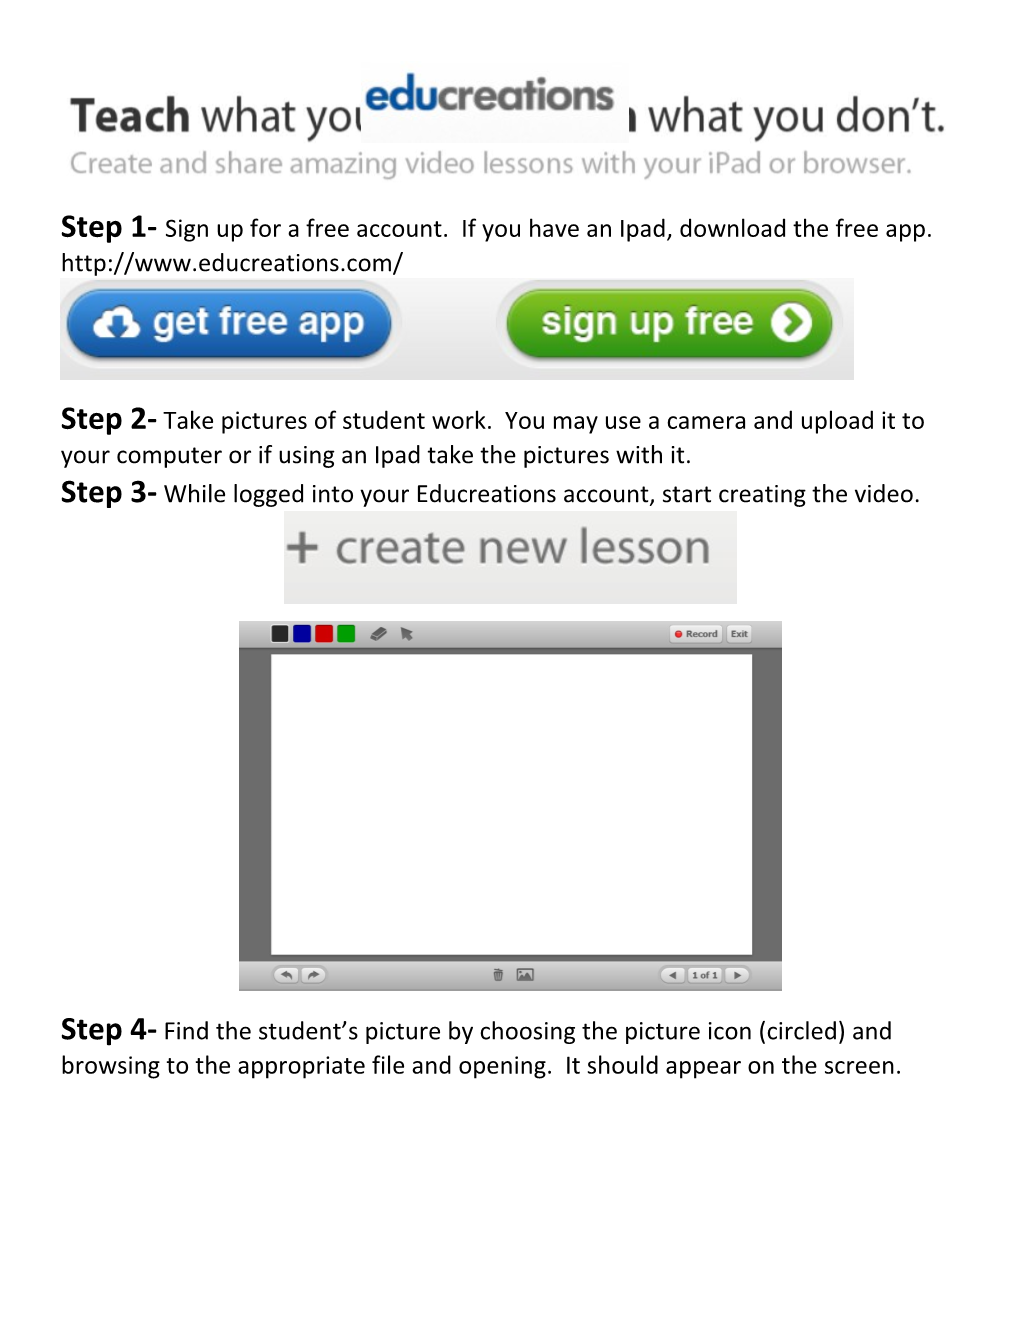 Step 1- Sign up for a Free Account. If You Have an Ipad, Download the Free App